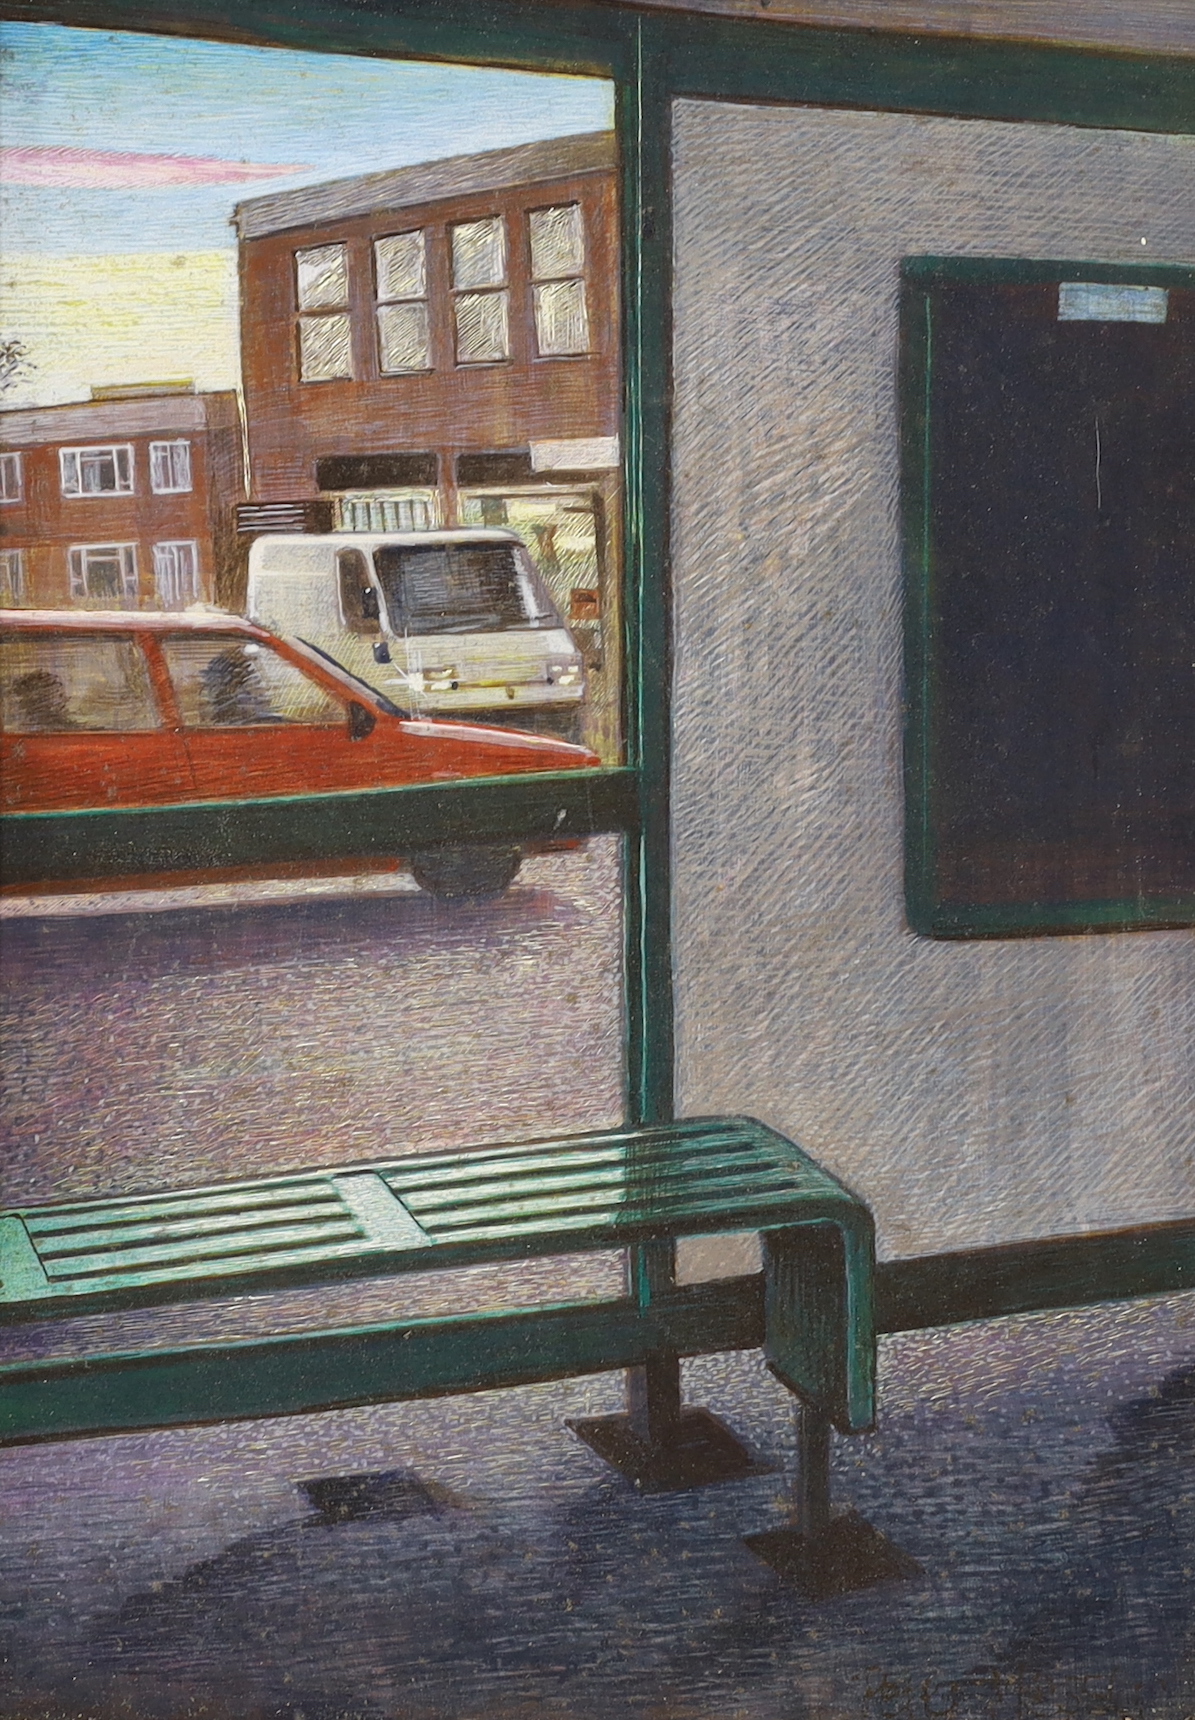 Peter Messer (Lewes artist, b.1954), egg tempura on gesso ground on board, Bus Stop before vehicles, signed, inscribed verso, 22 x 16cm